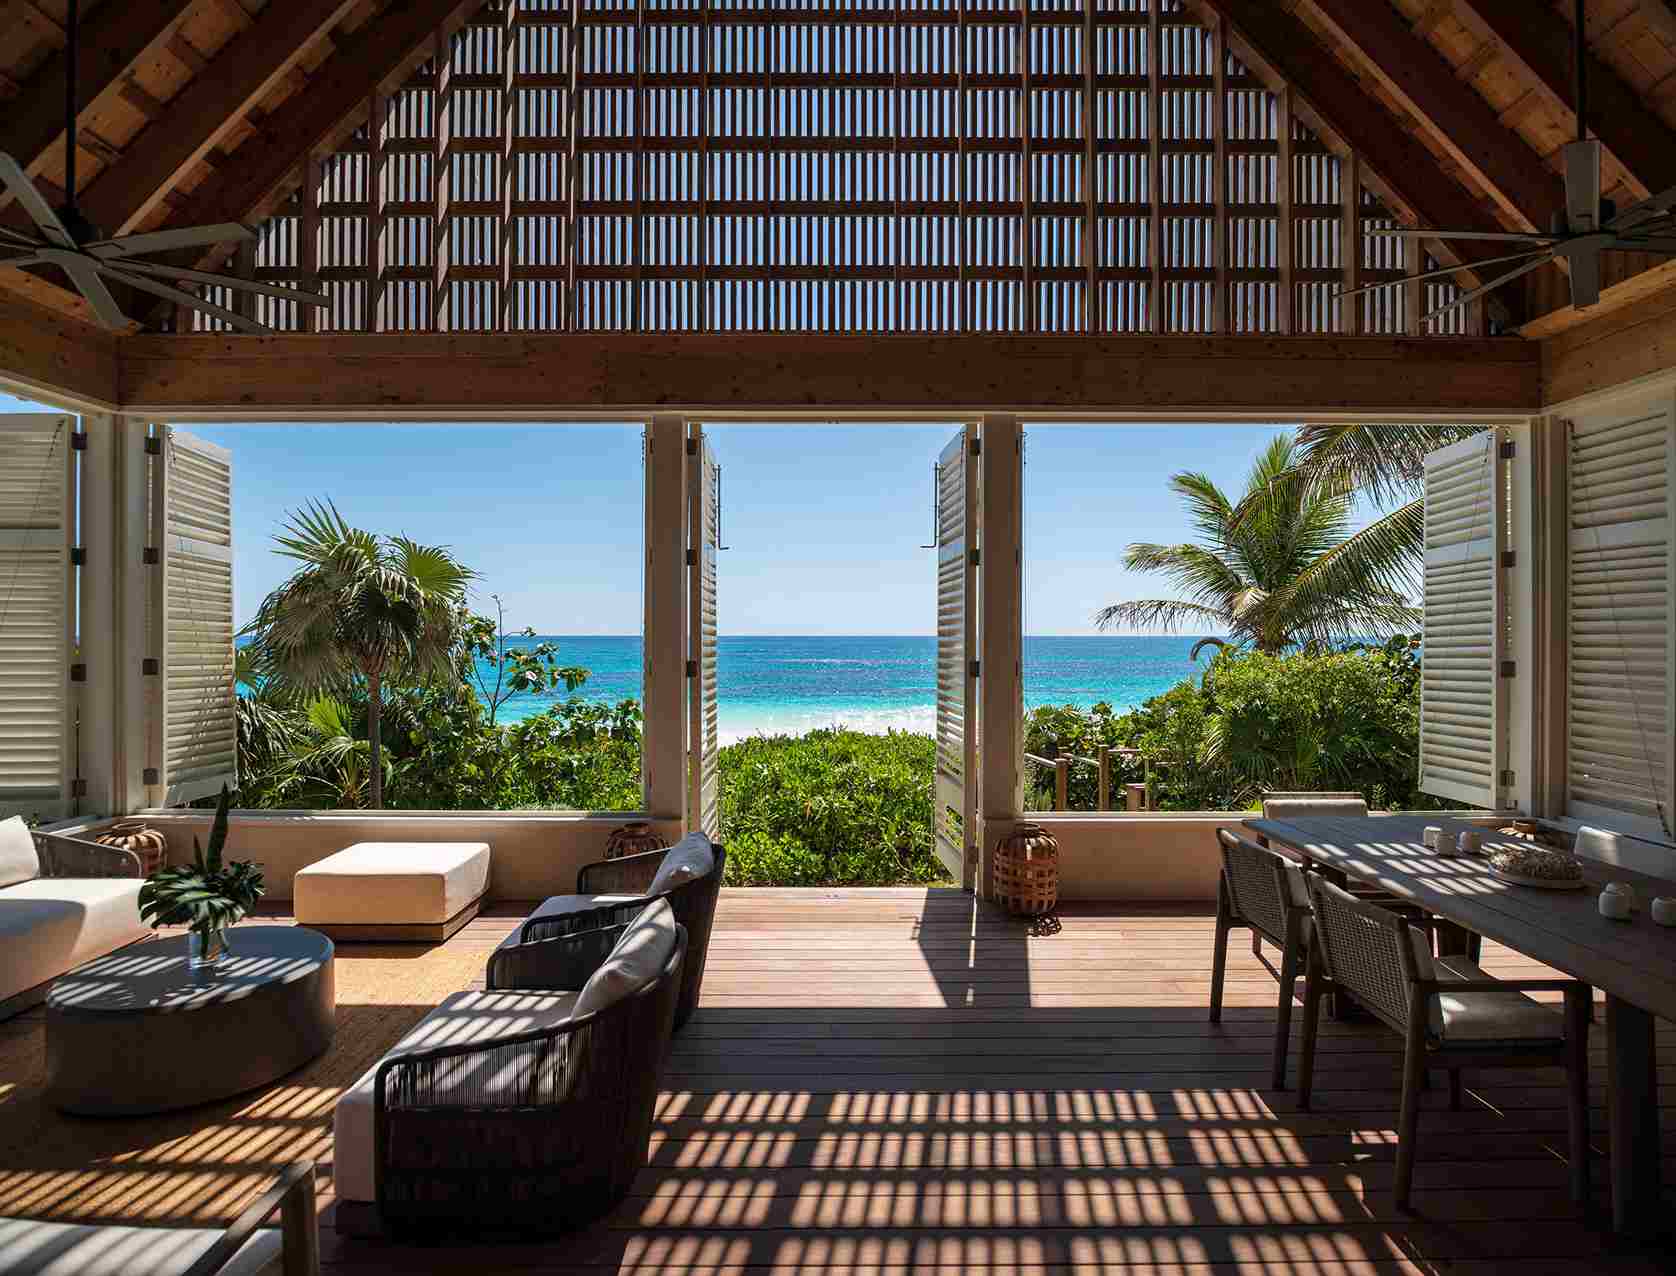 Brillhart Architecture Captures the Essence of Bahamas in this Tropical ...